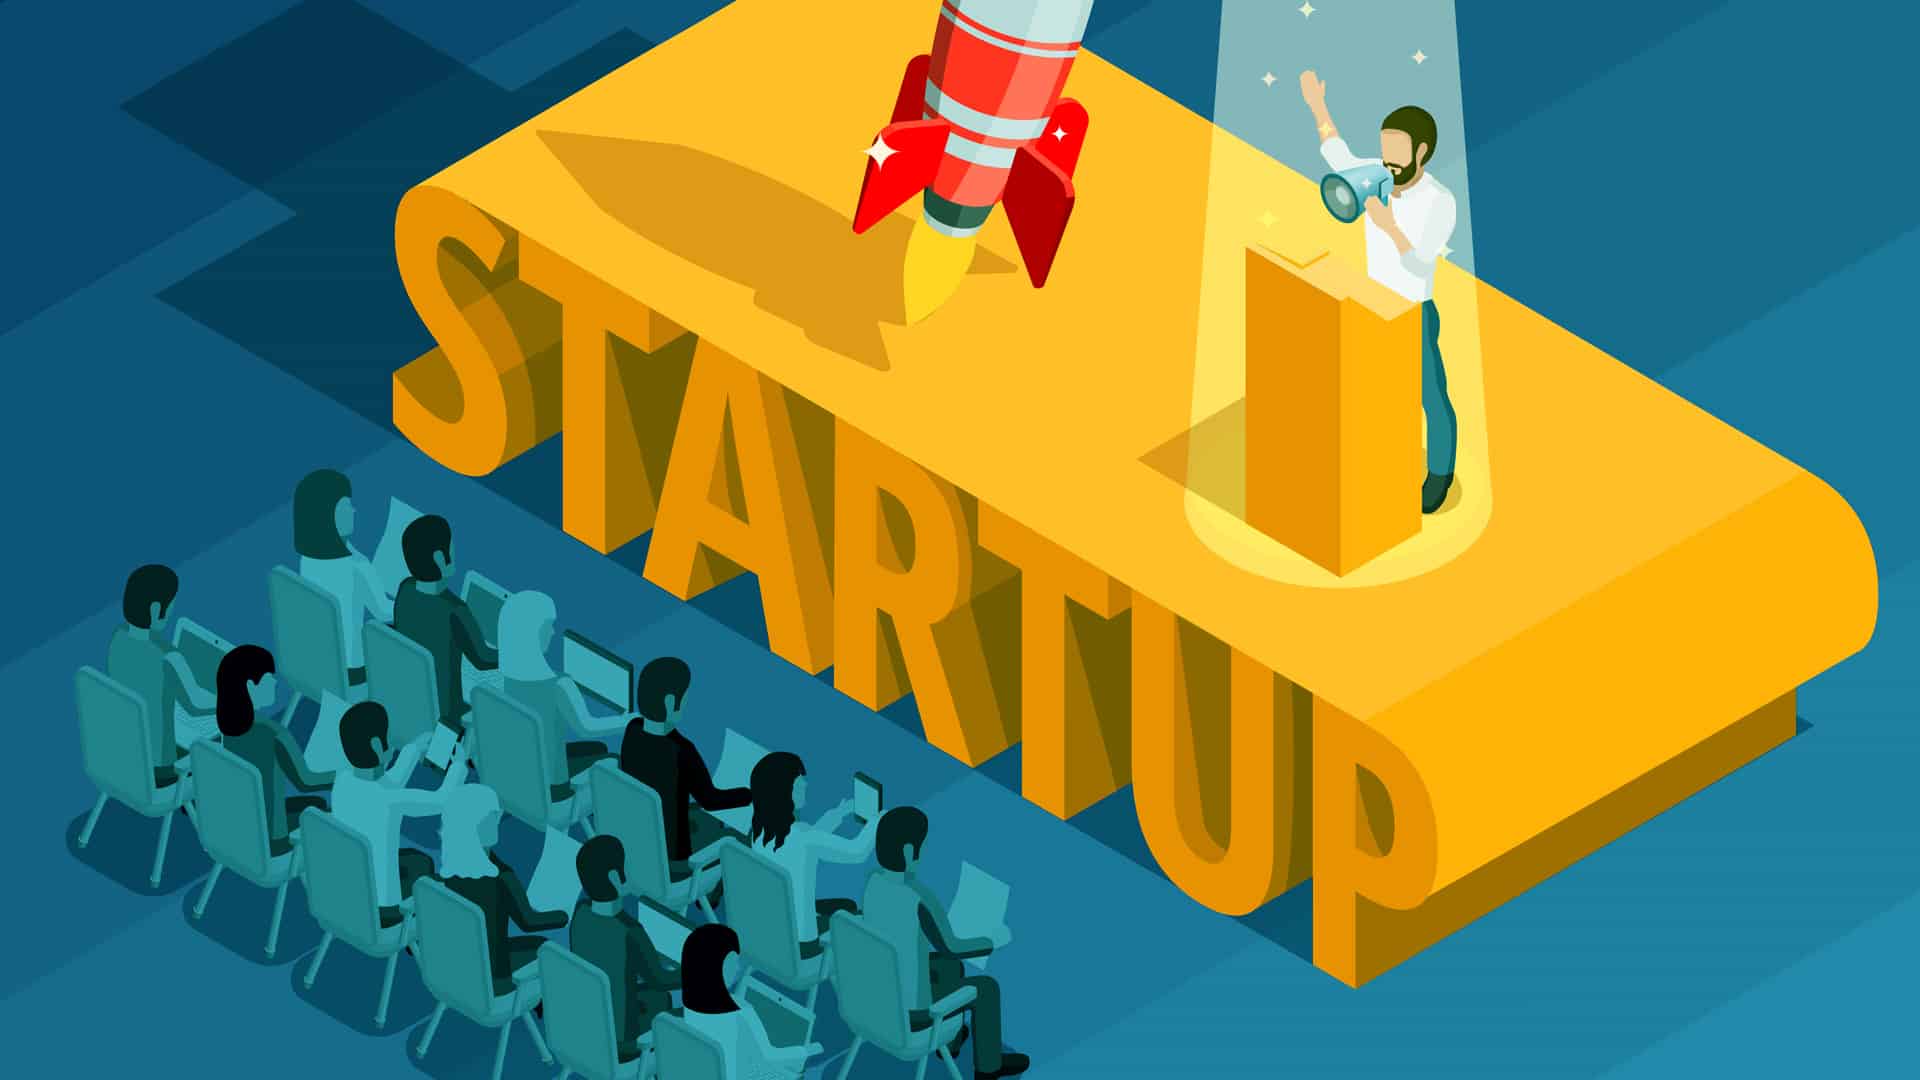 Haryana Cabinet approves startup and data centre policies